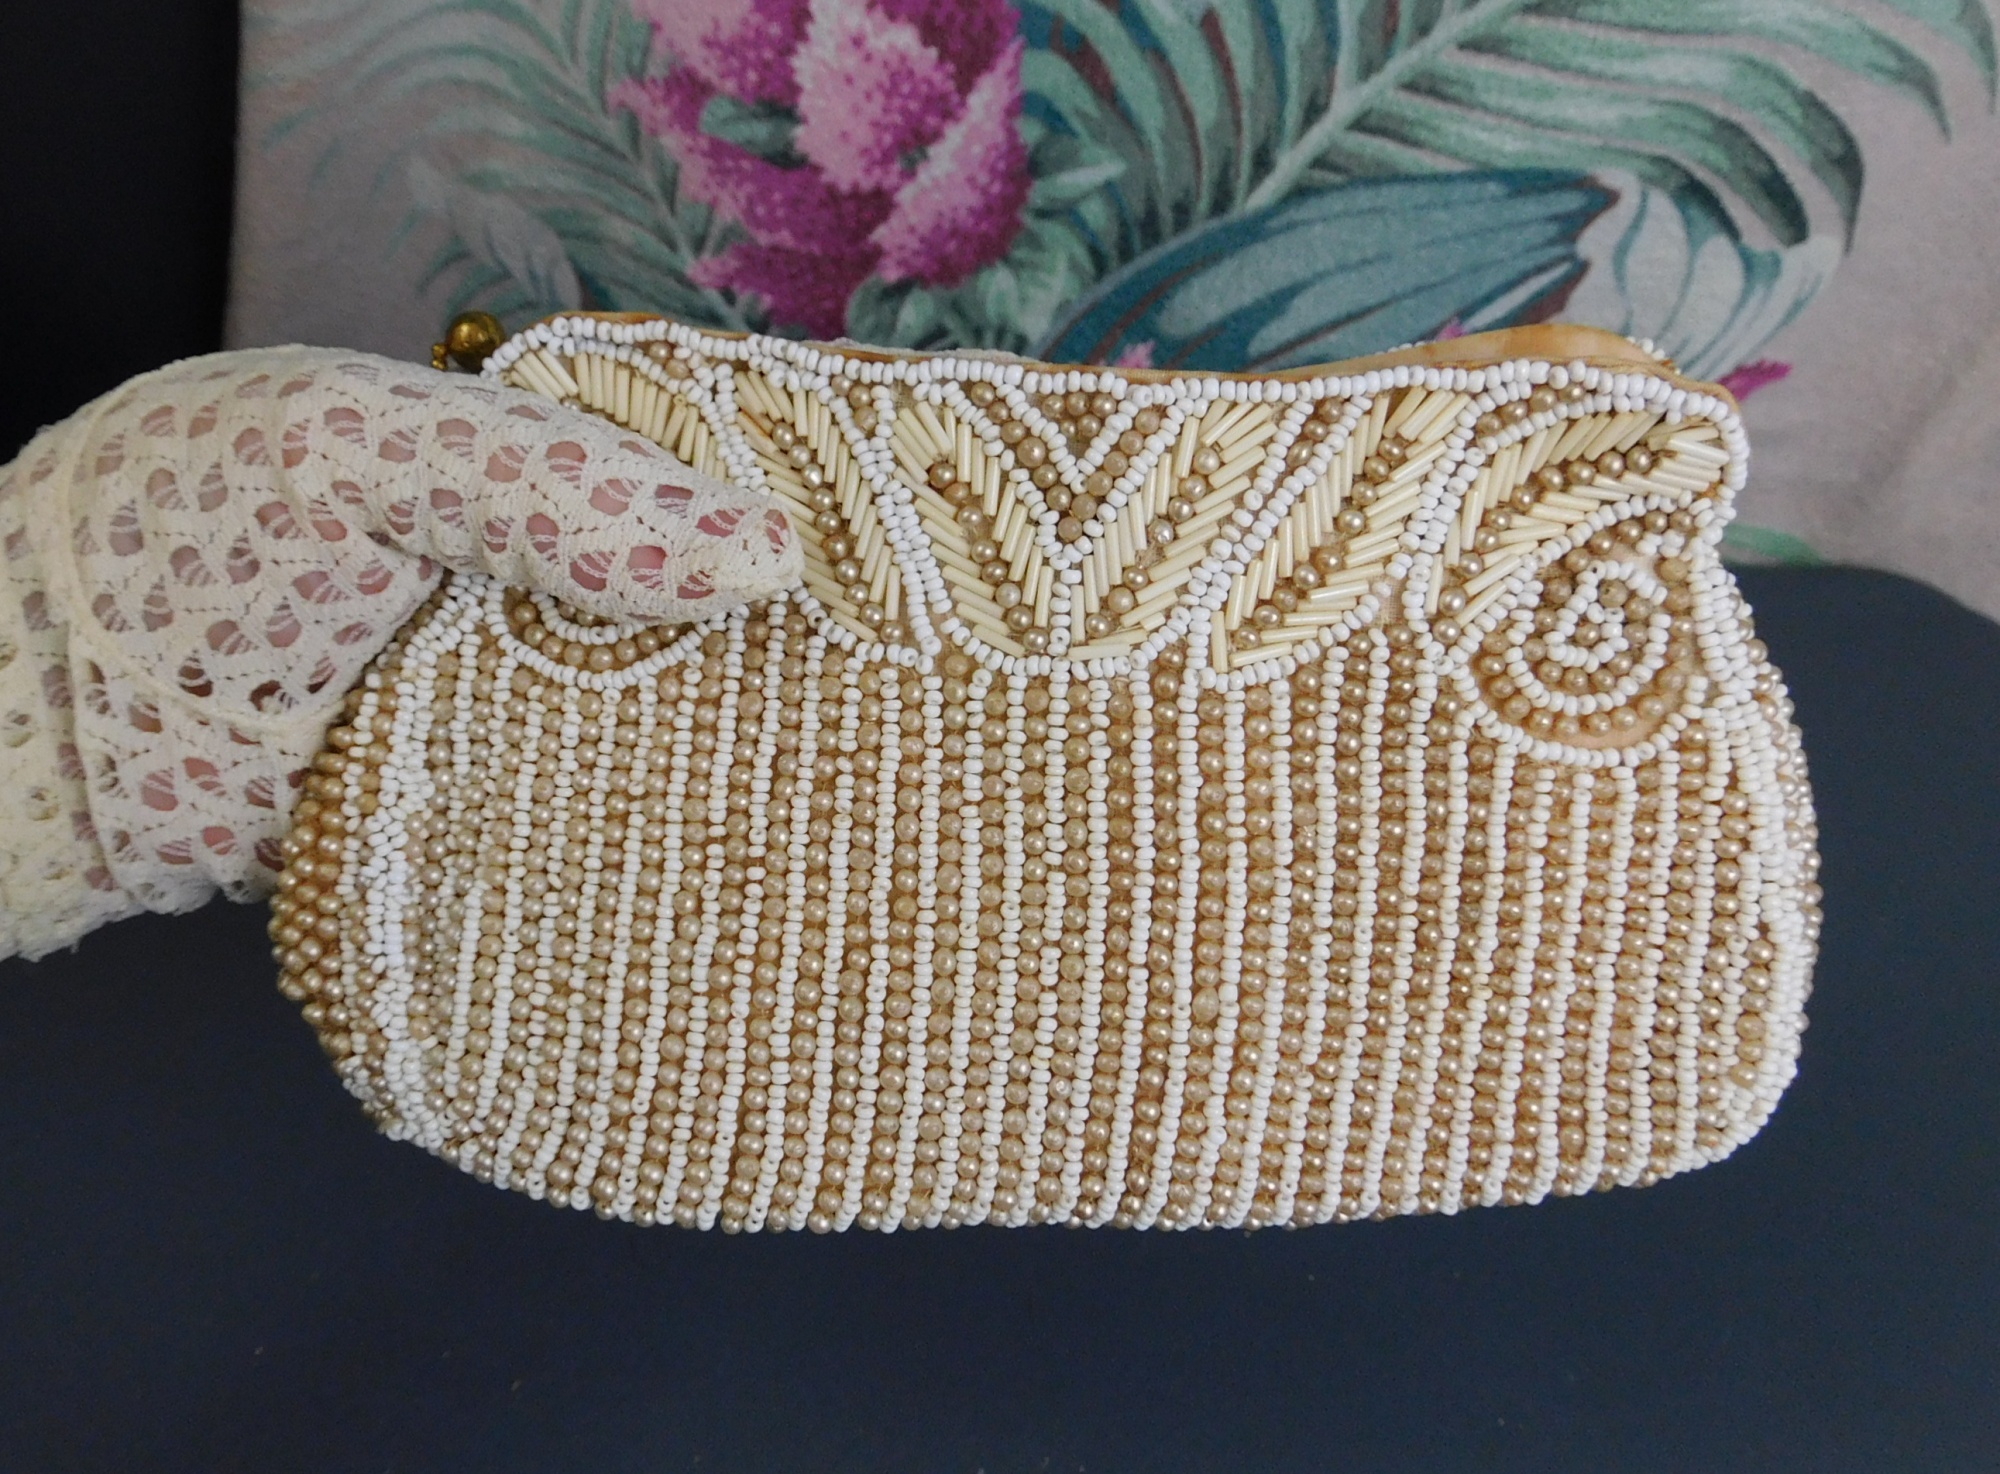 Small Vintage 1930s Beaded Clutch Purse, Evening Bag Beads & Faux